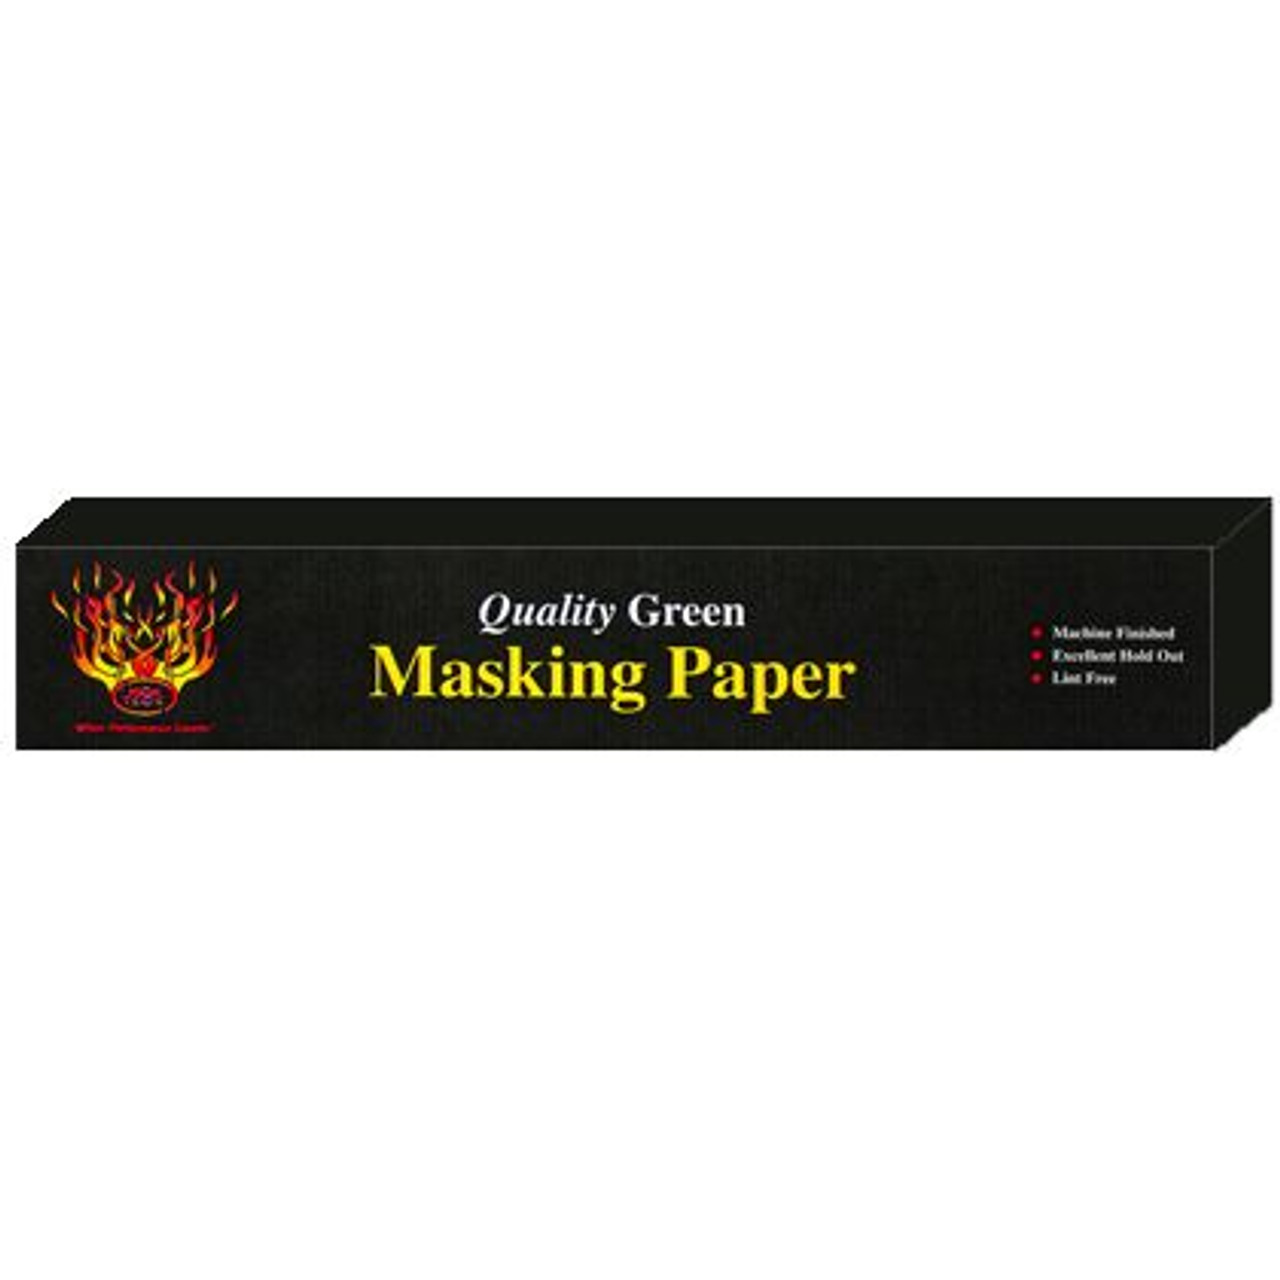 Quality Green Masking Paper, Weight: 35#, Size: 18" X 400'